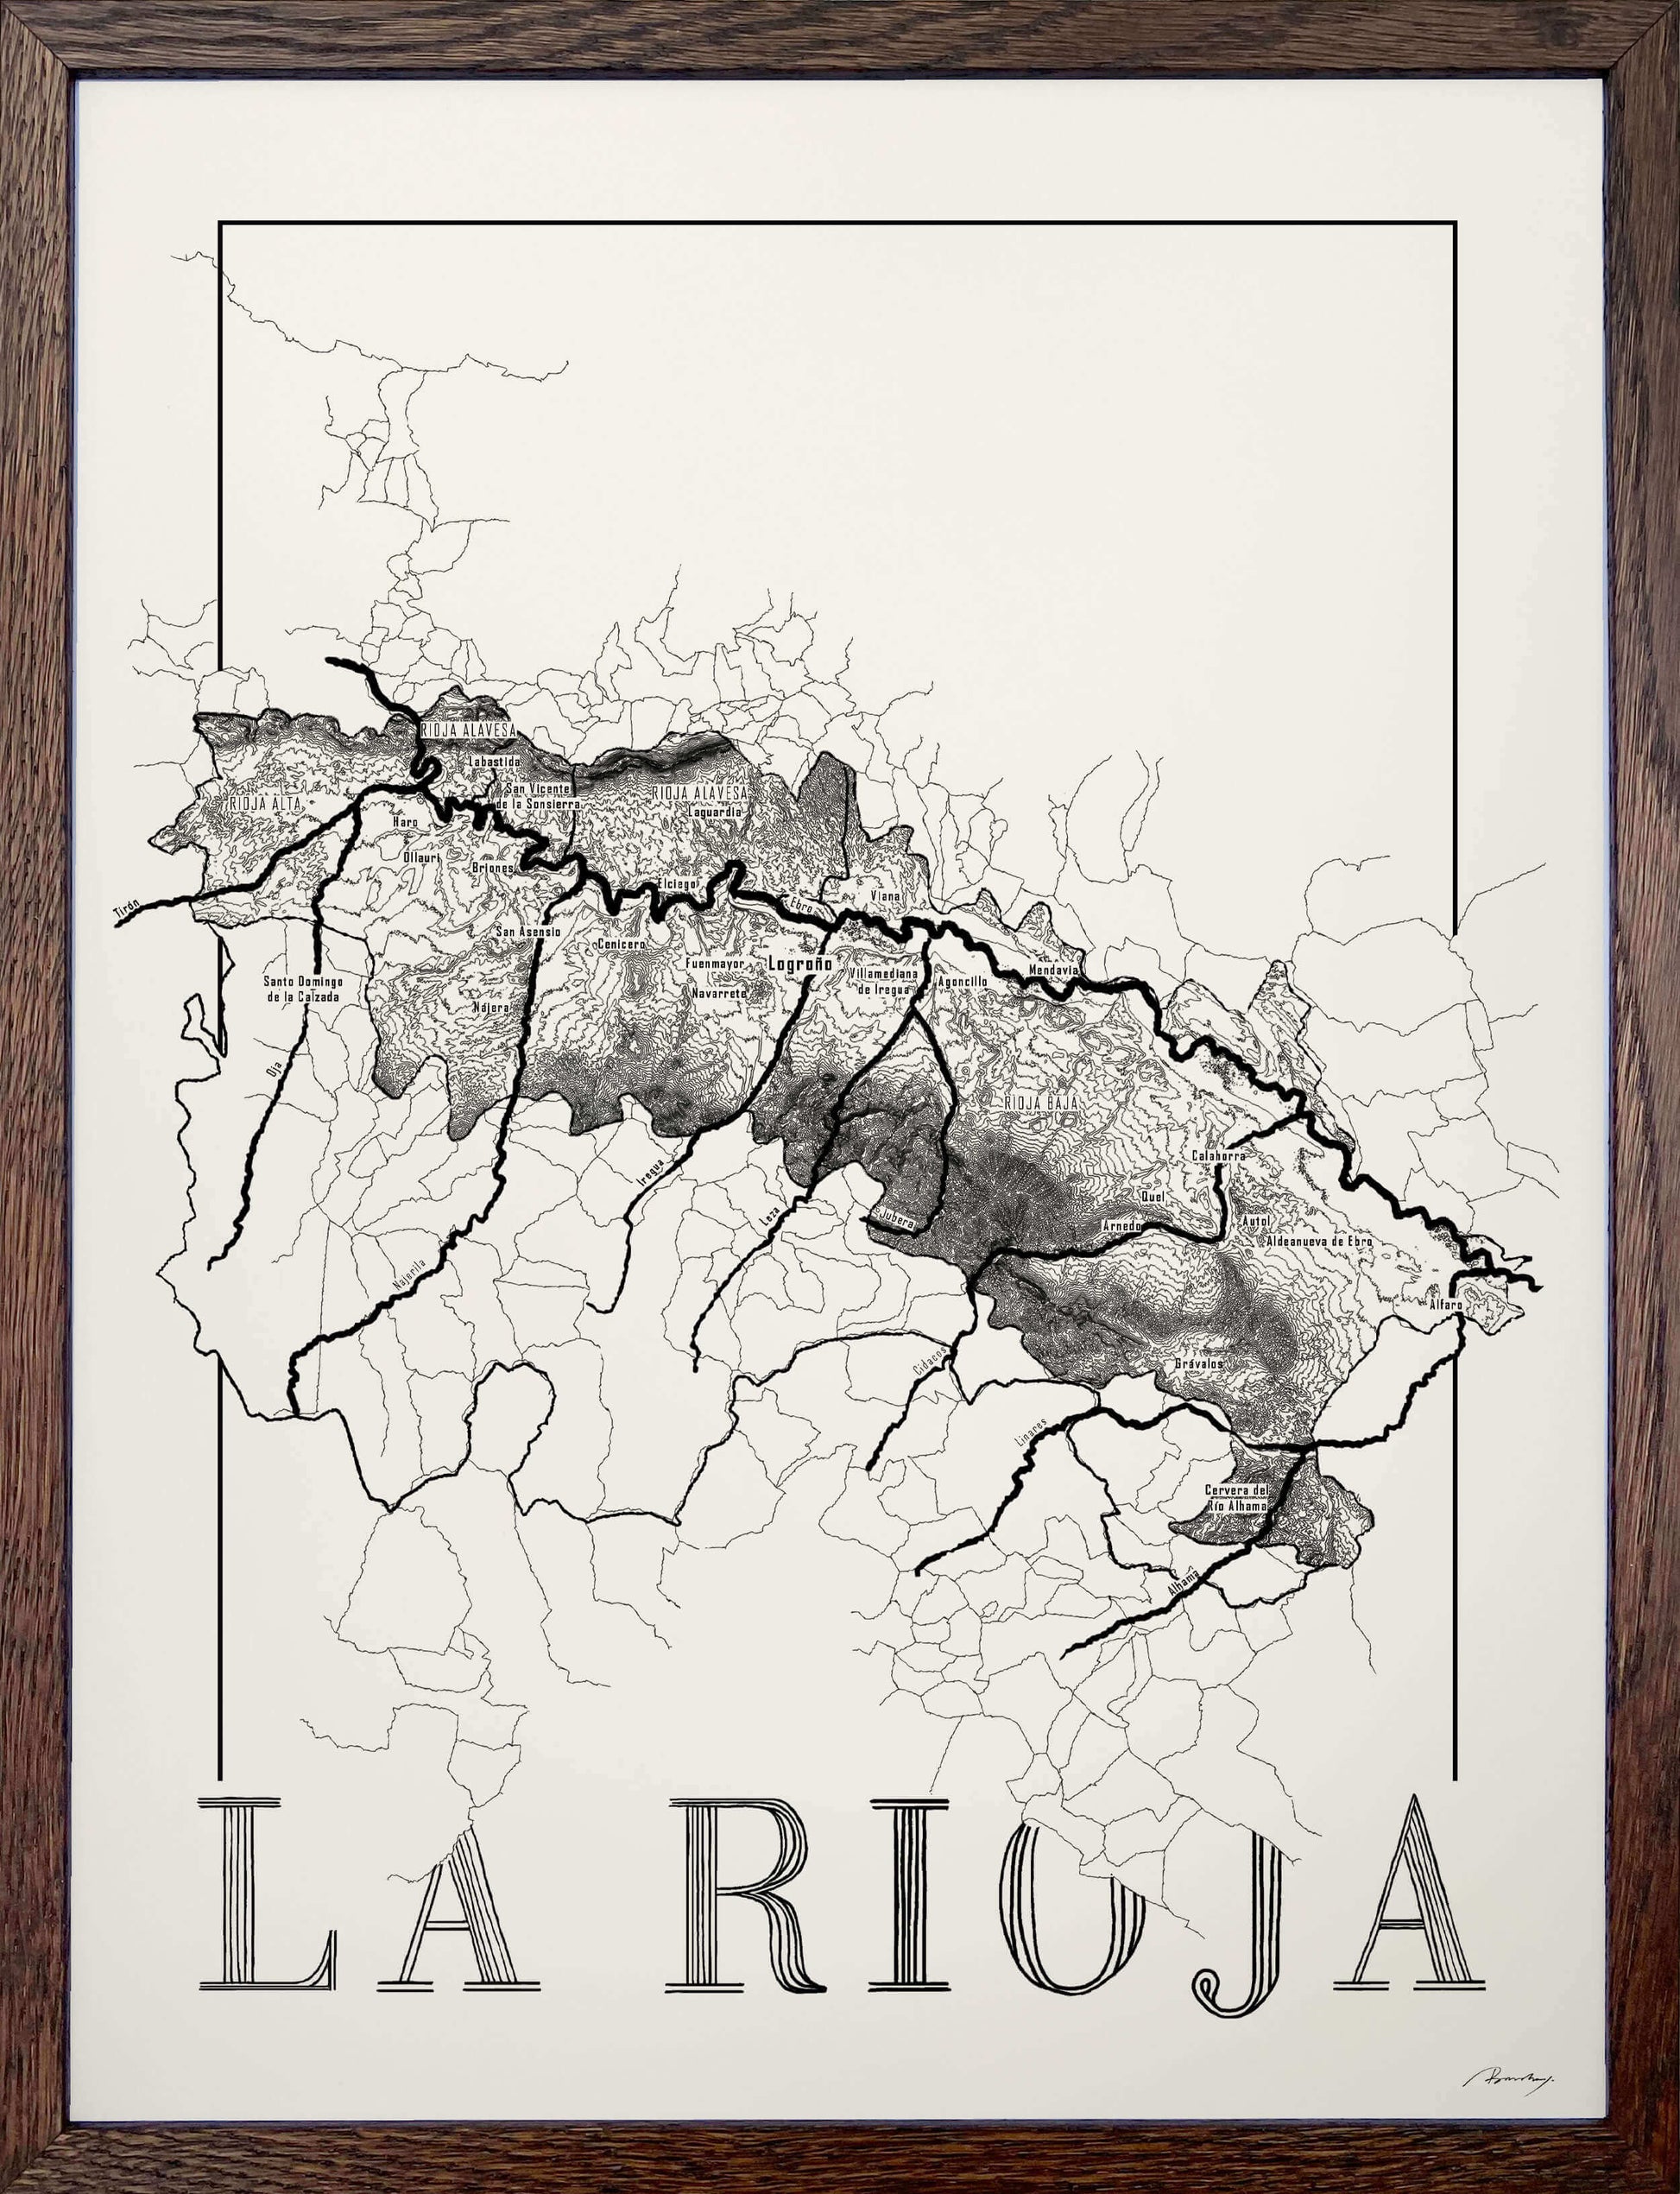 Rioja Wine map poster. Exclusive wine map posters. Premium quality wine maps printed on environmentally friendly FSC marked paper.